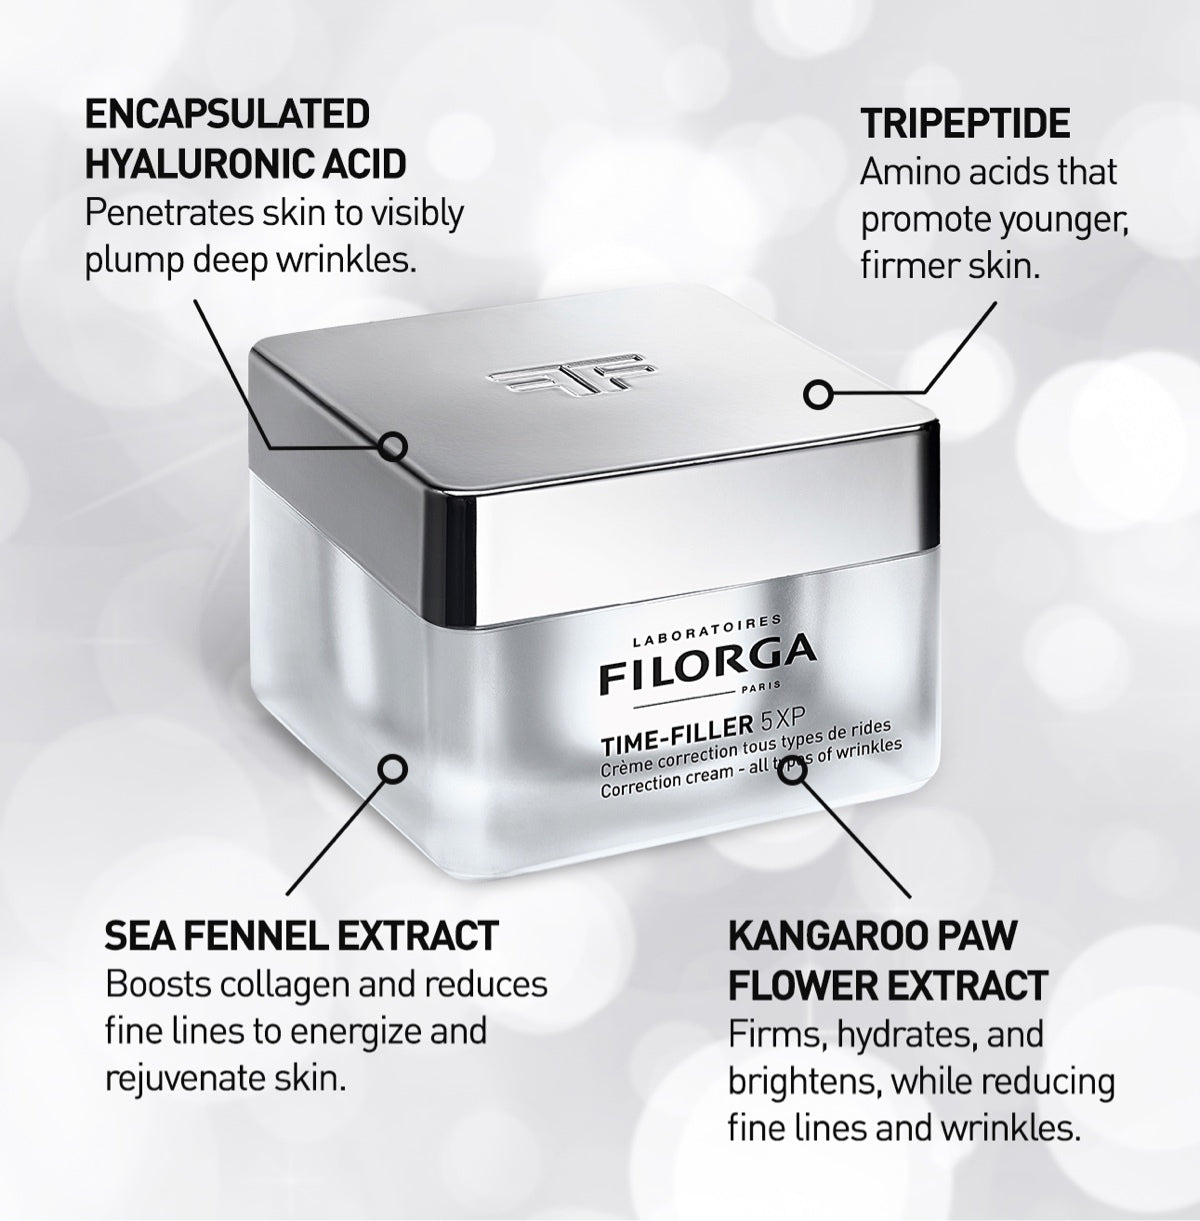 Jar of closed FILORGA TIME-FILLER 5-XP CREAM highlighting four ingredients and their action